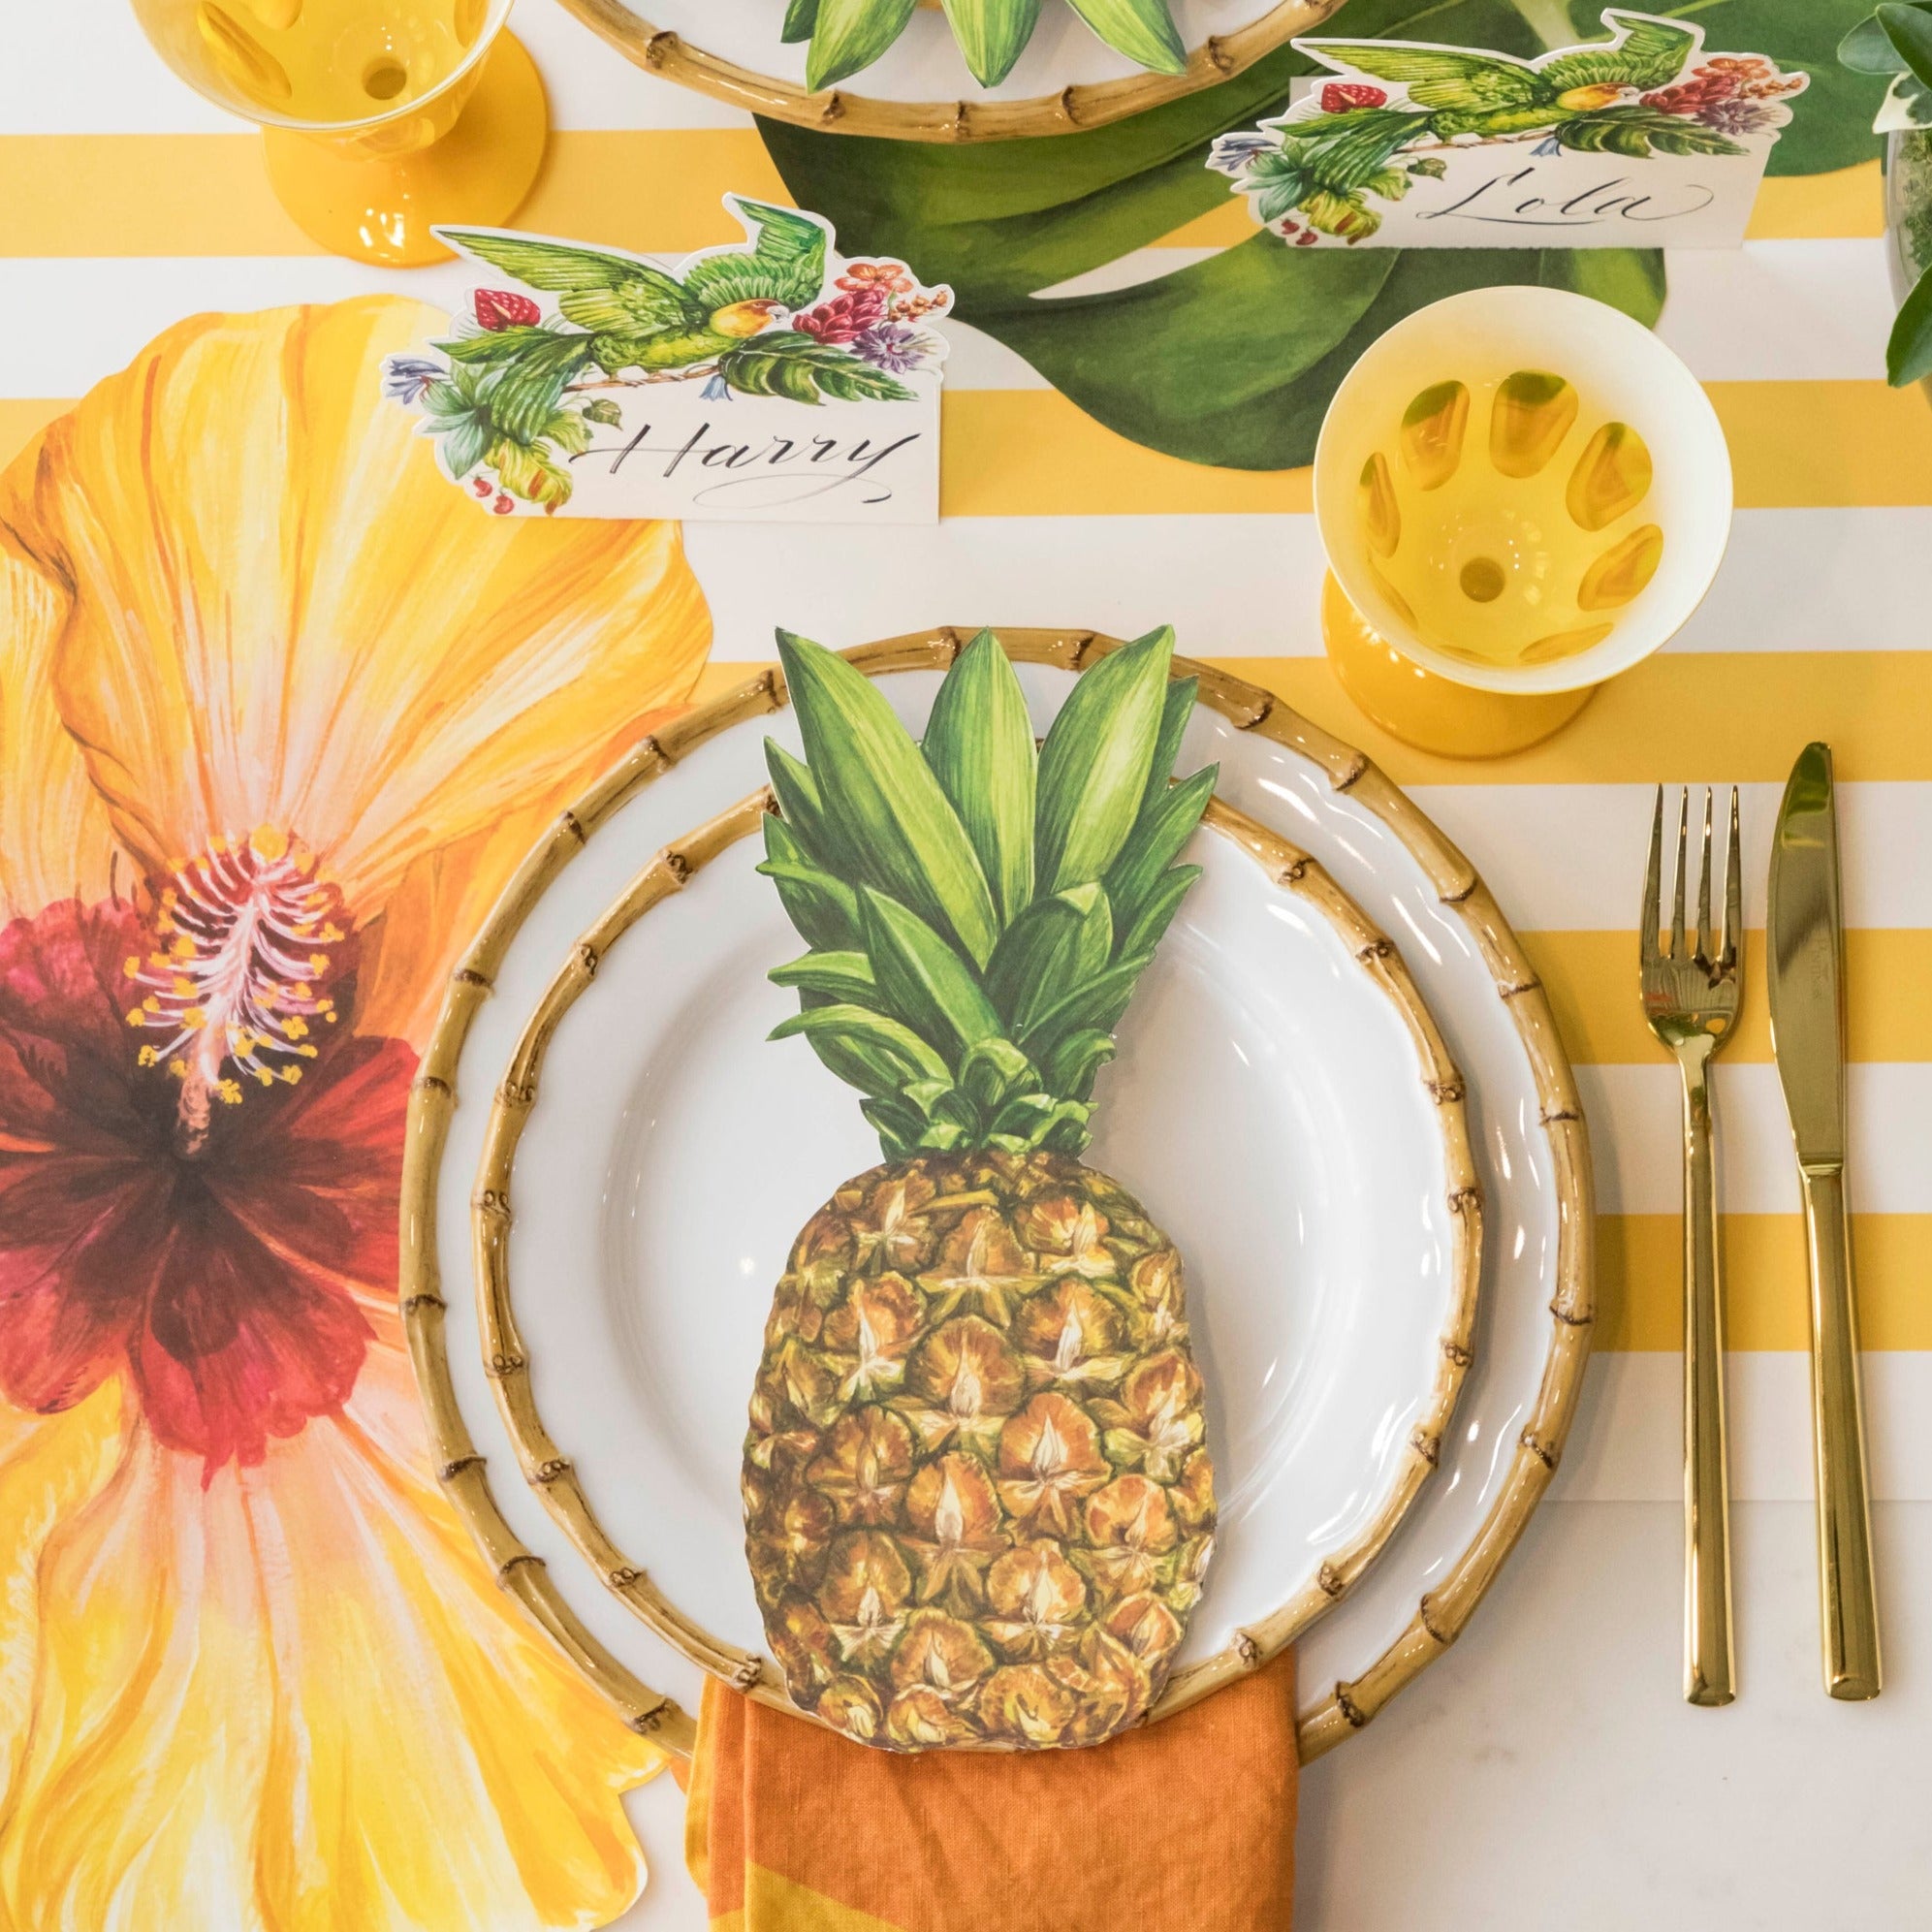 Top-down view of a vibrant tropical-themed place setting featuring a Parrot Place Card standing behind the plate.